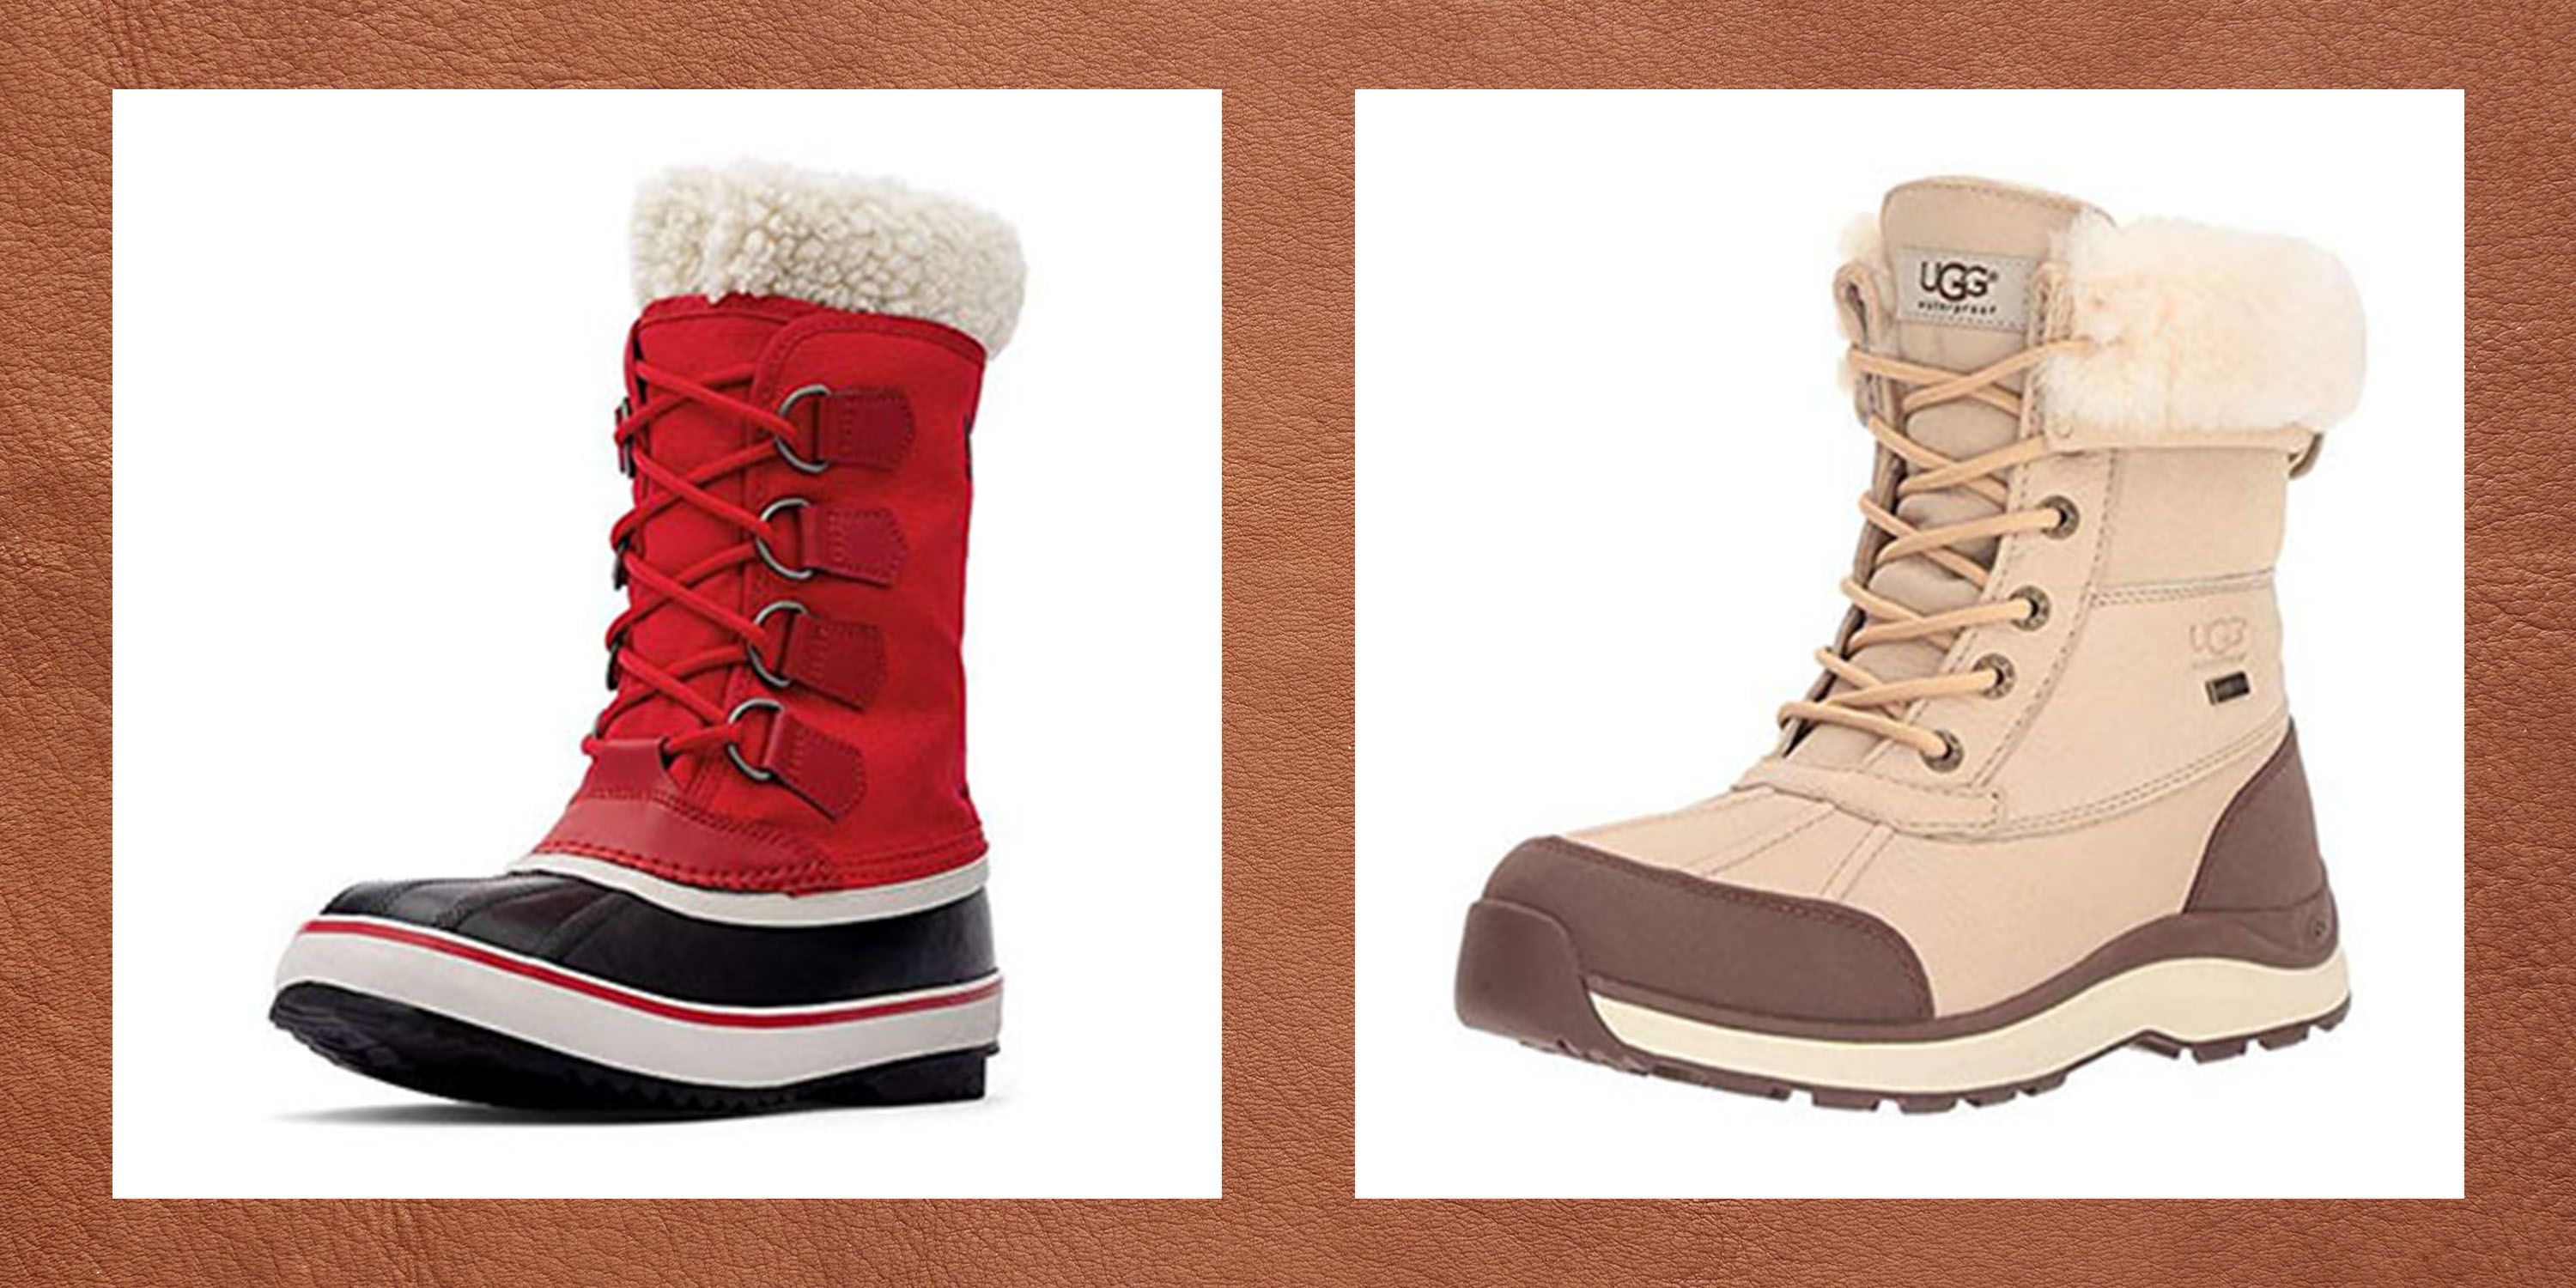 womens long snow boots